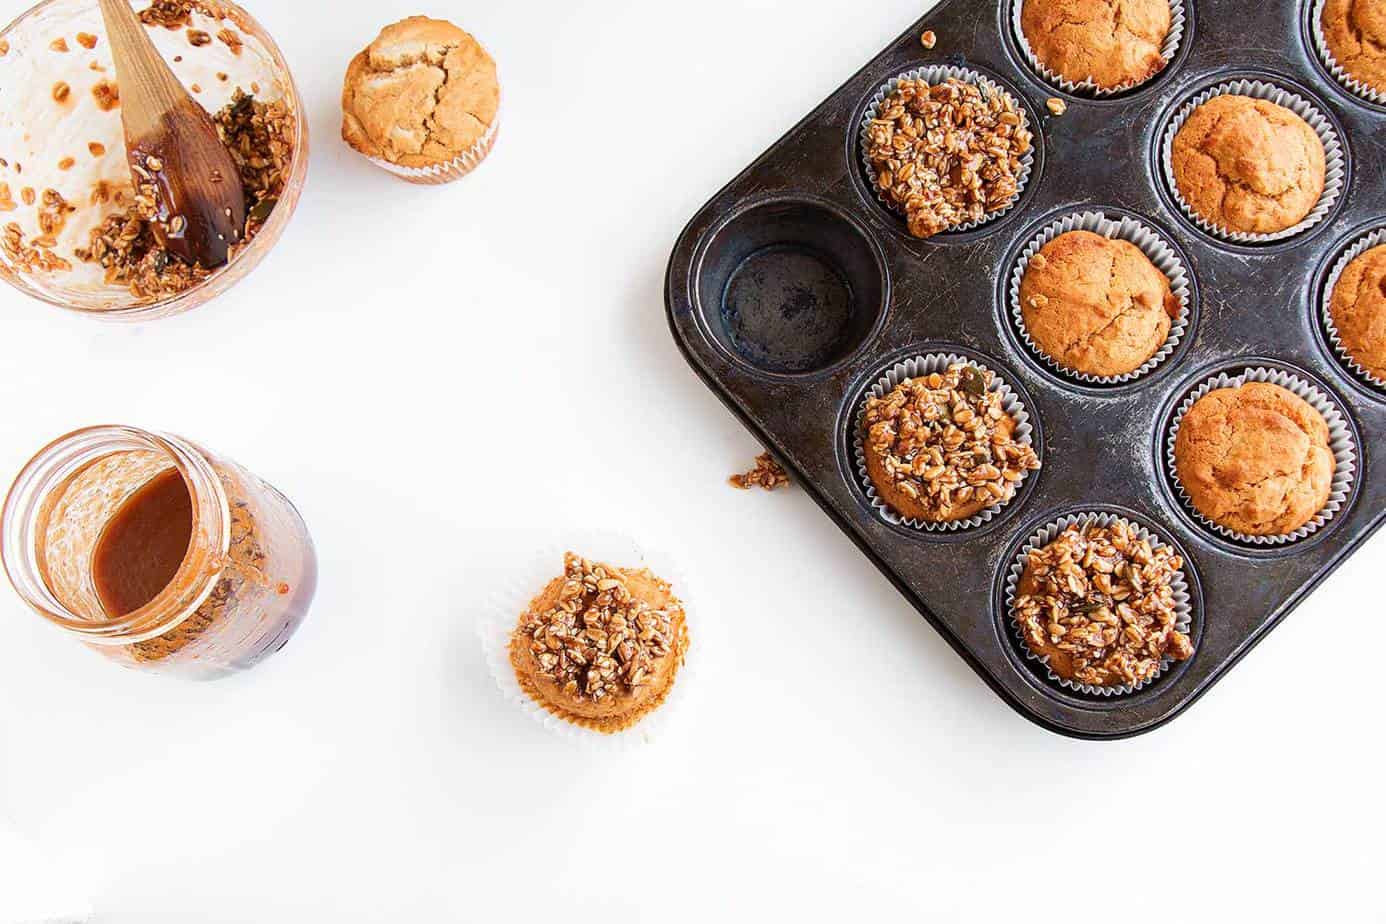 Muffins in a baking tray